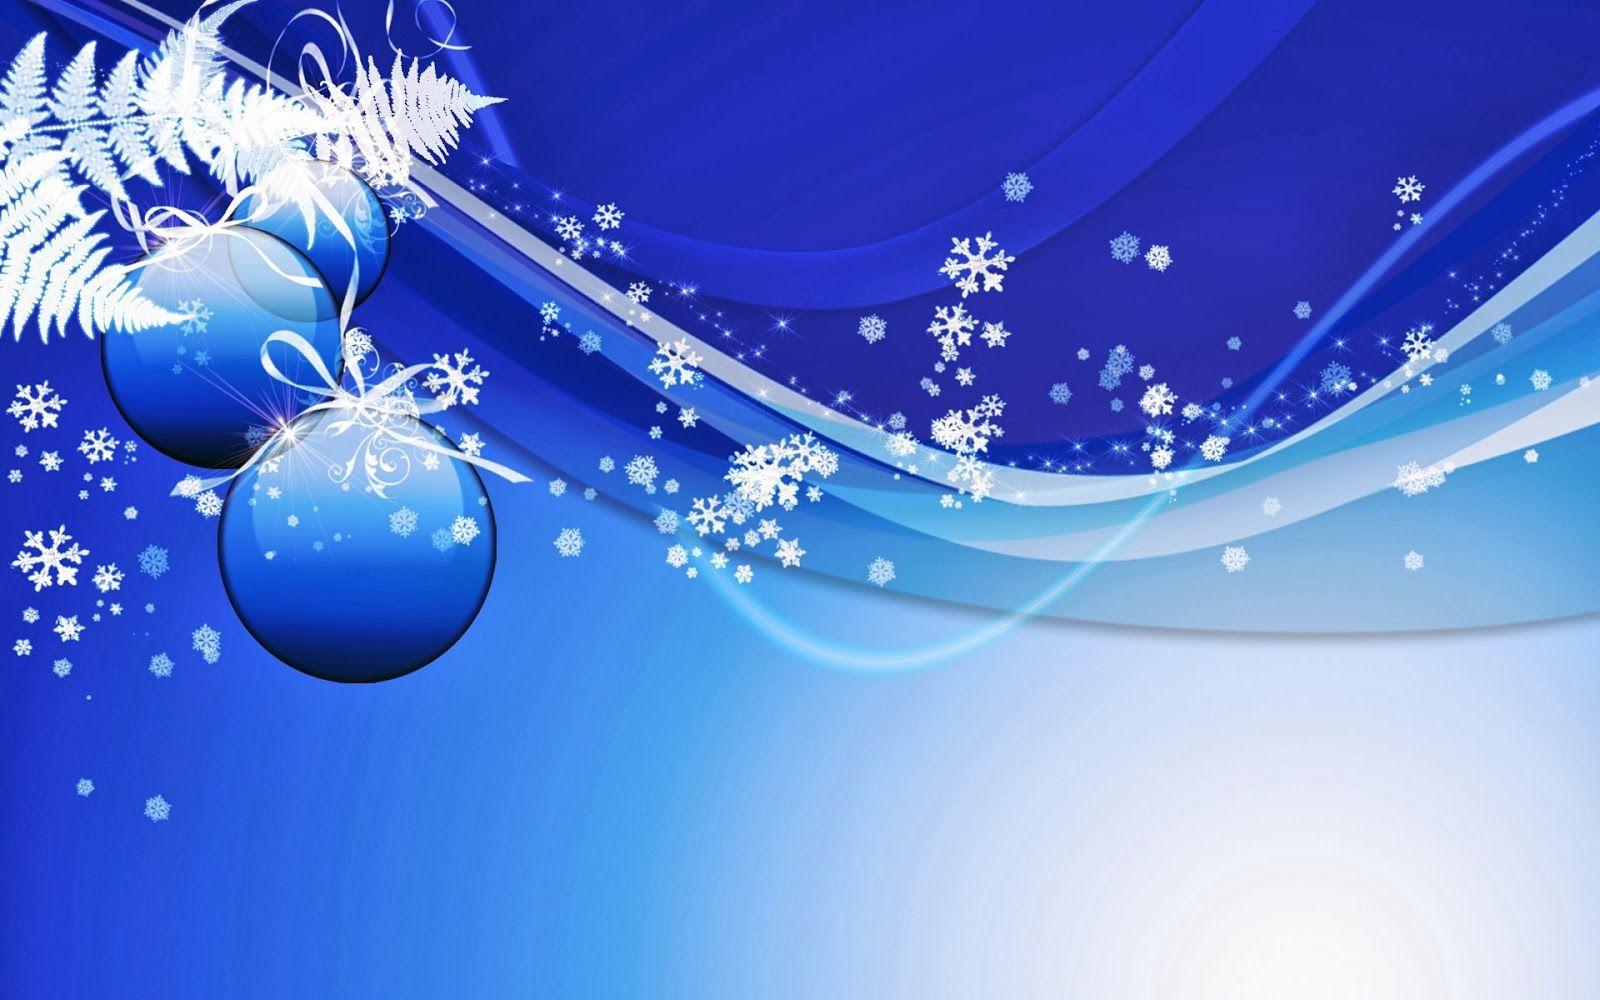 Christmas wallpaper Customs and Traditions. Wallpaper